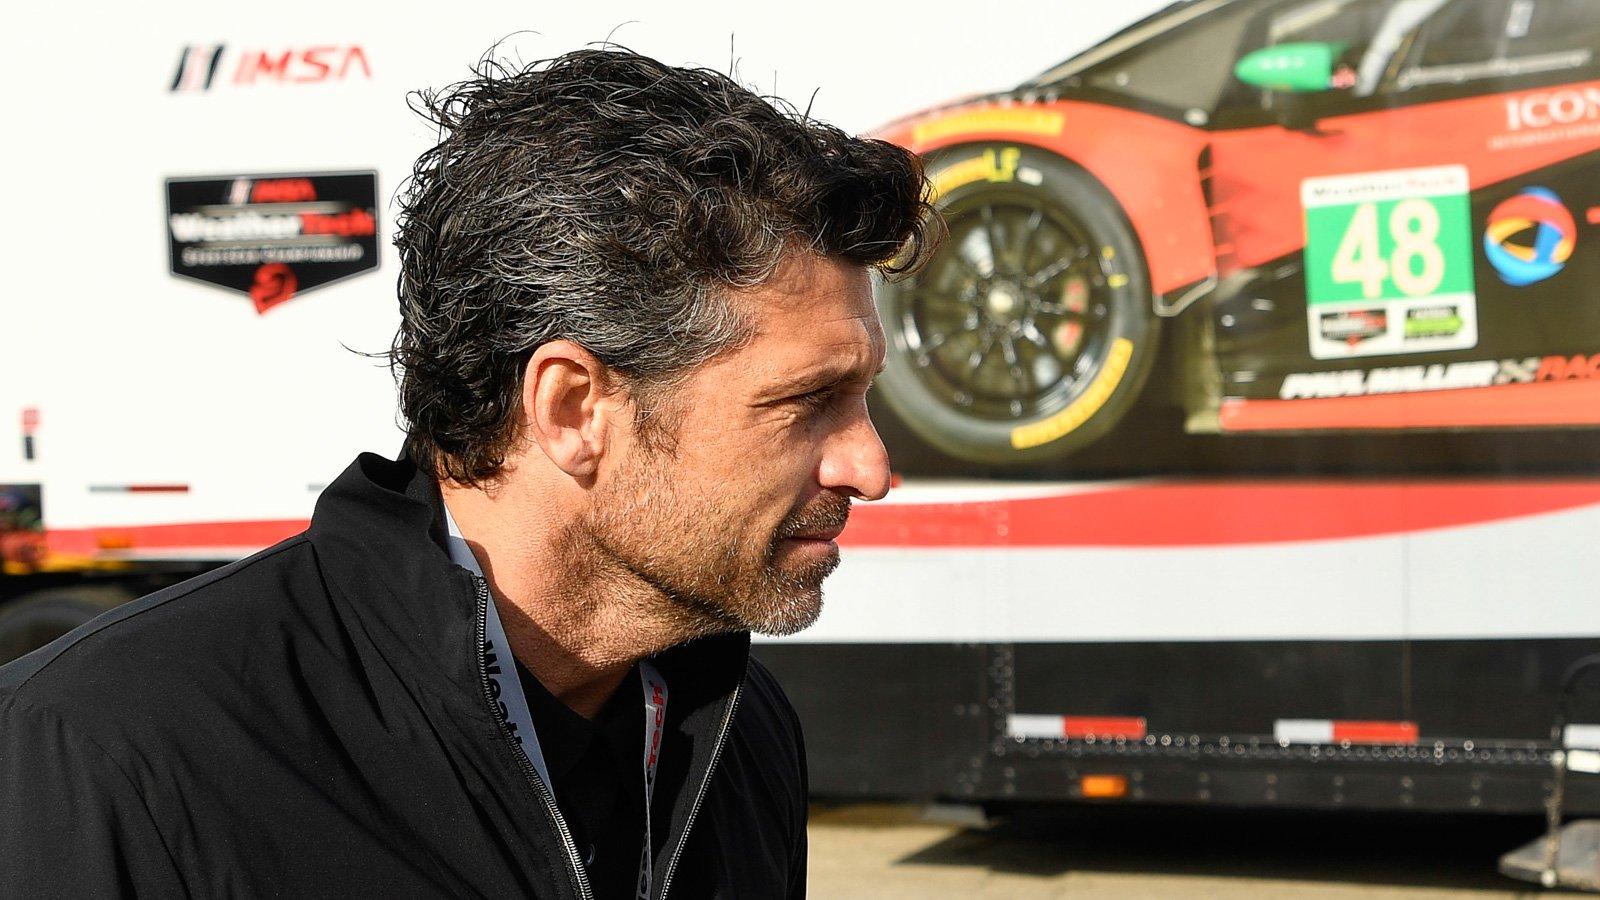 Patrick Dempsey bringing 'The Art of Racing in the Rain' to the big